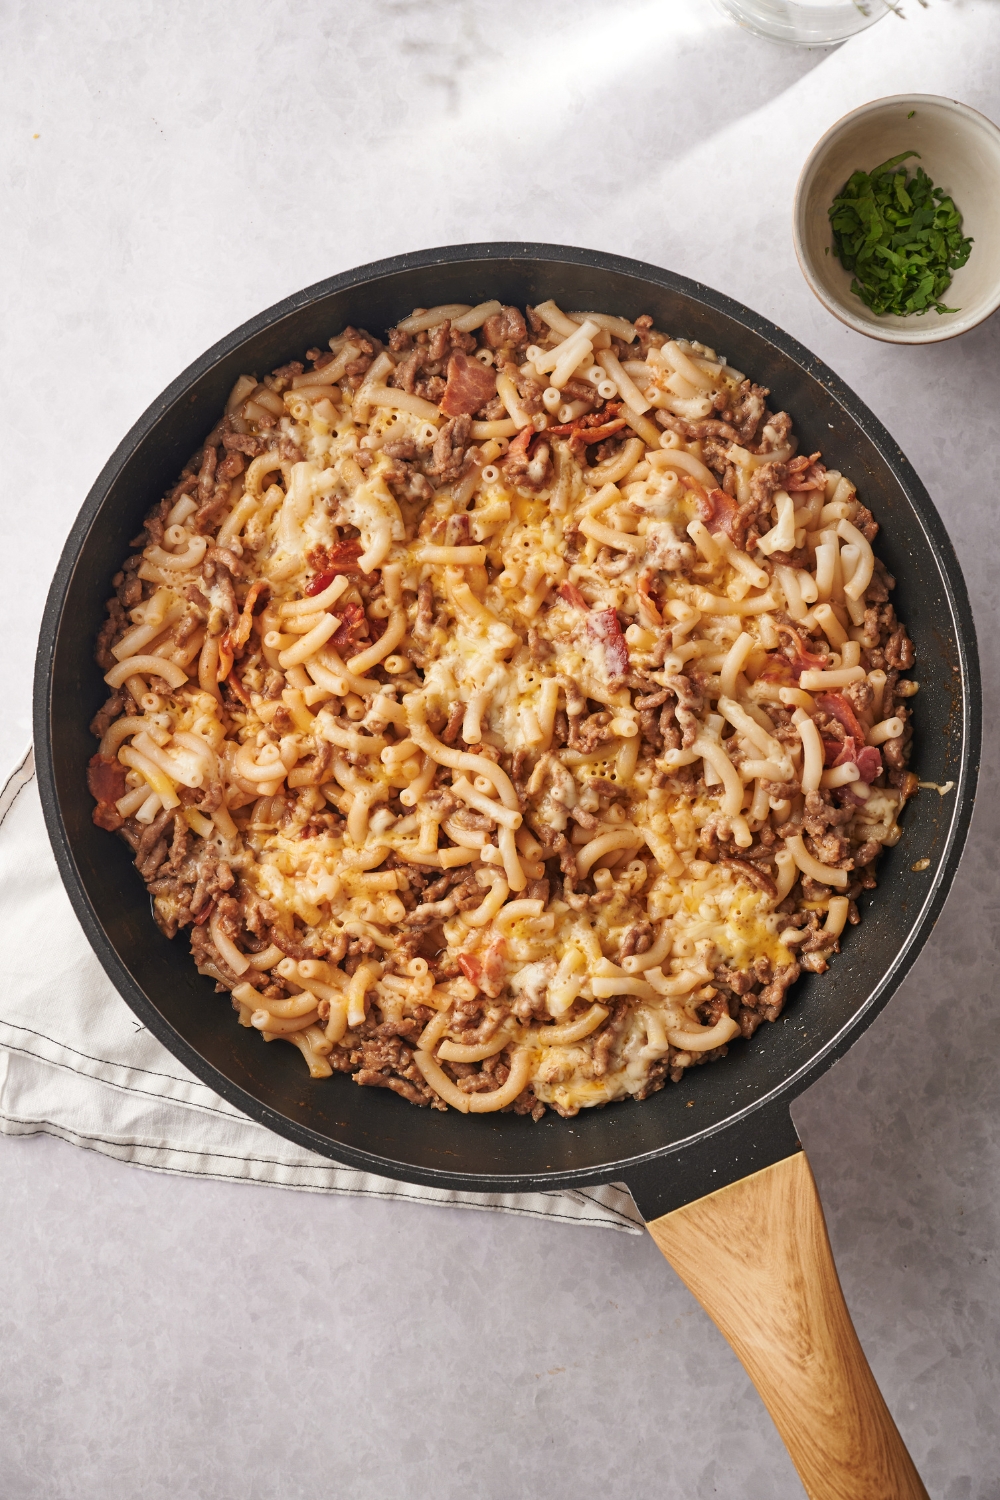 A skillet filled with cooked ground beef, pasta, and bacon covered in a layer of melted cheese.